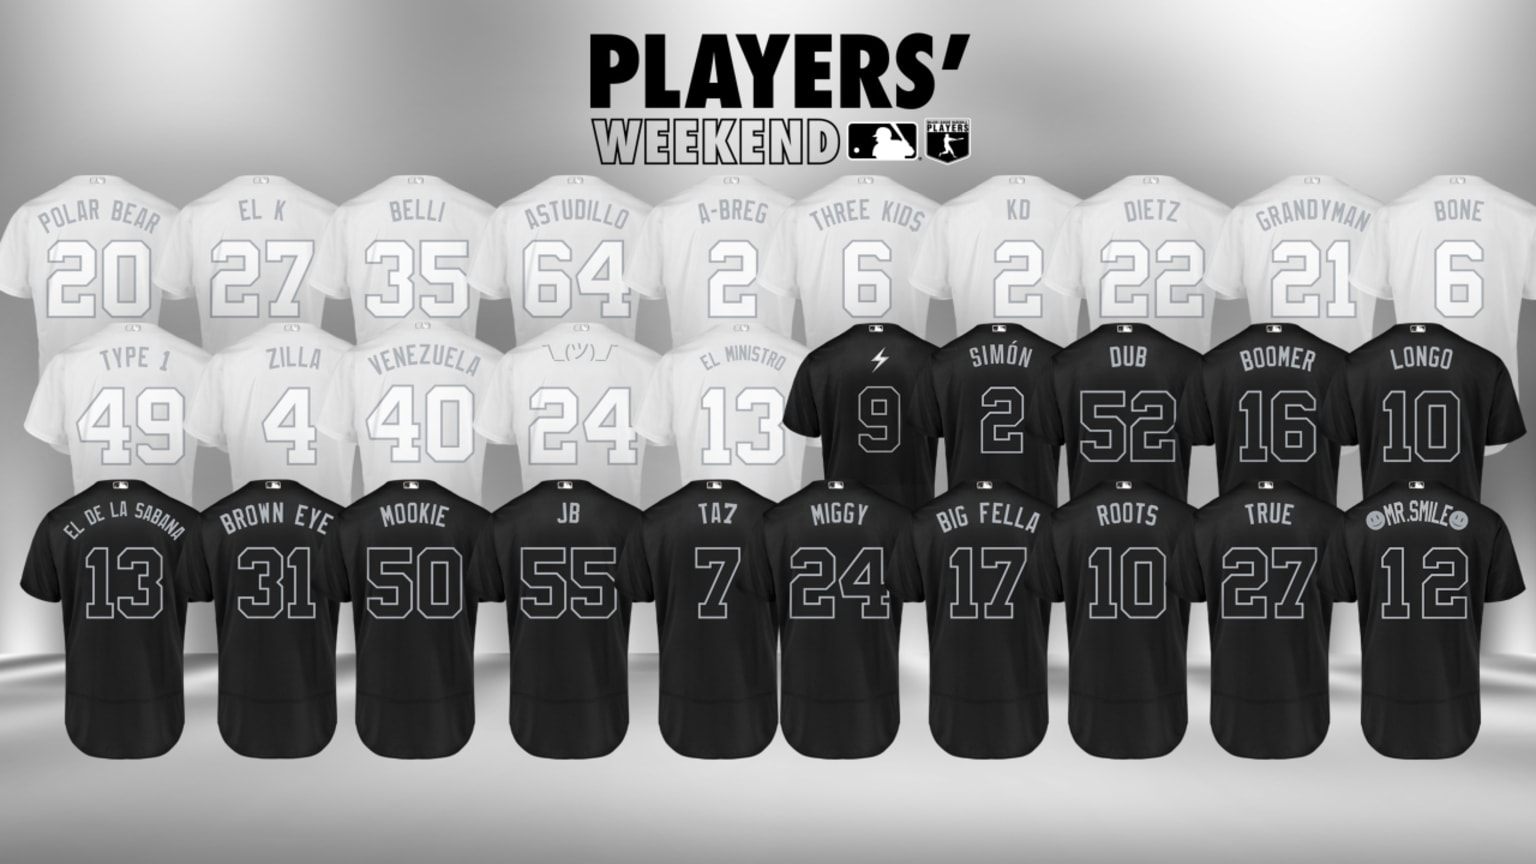 Players' Weekend starts today, 08/22/2019